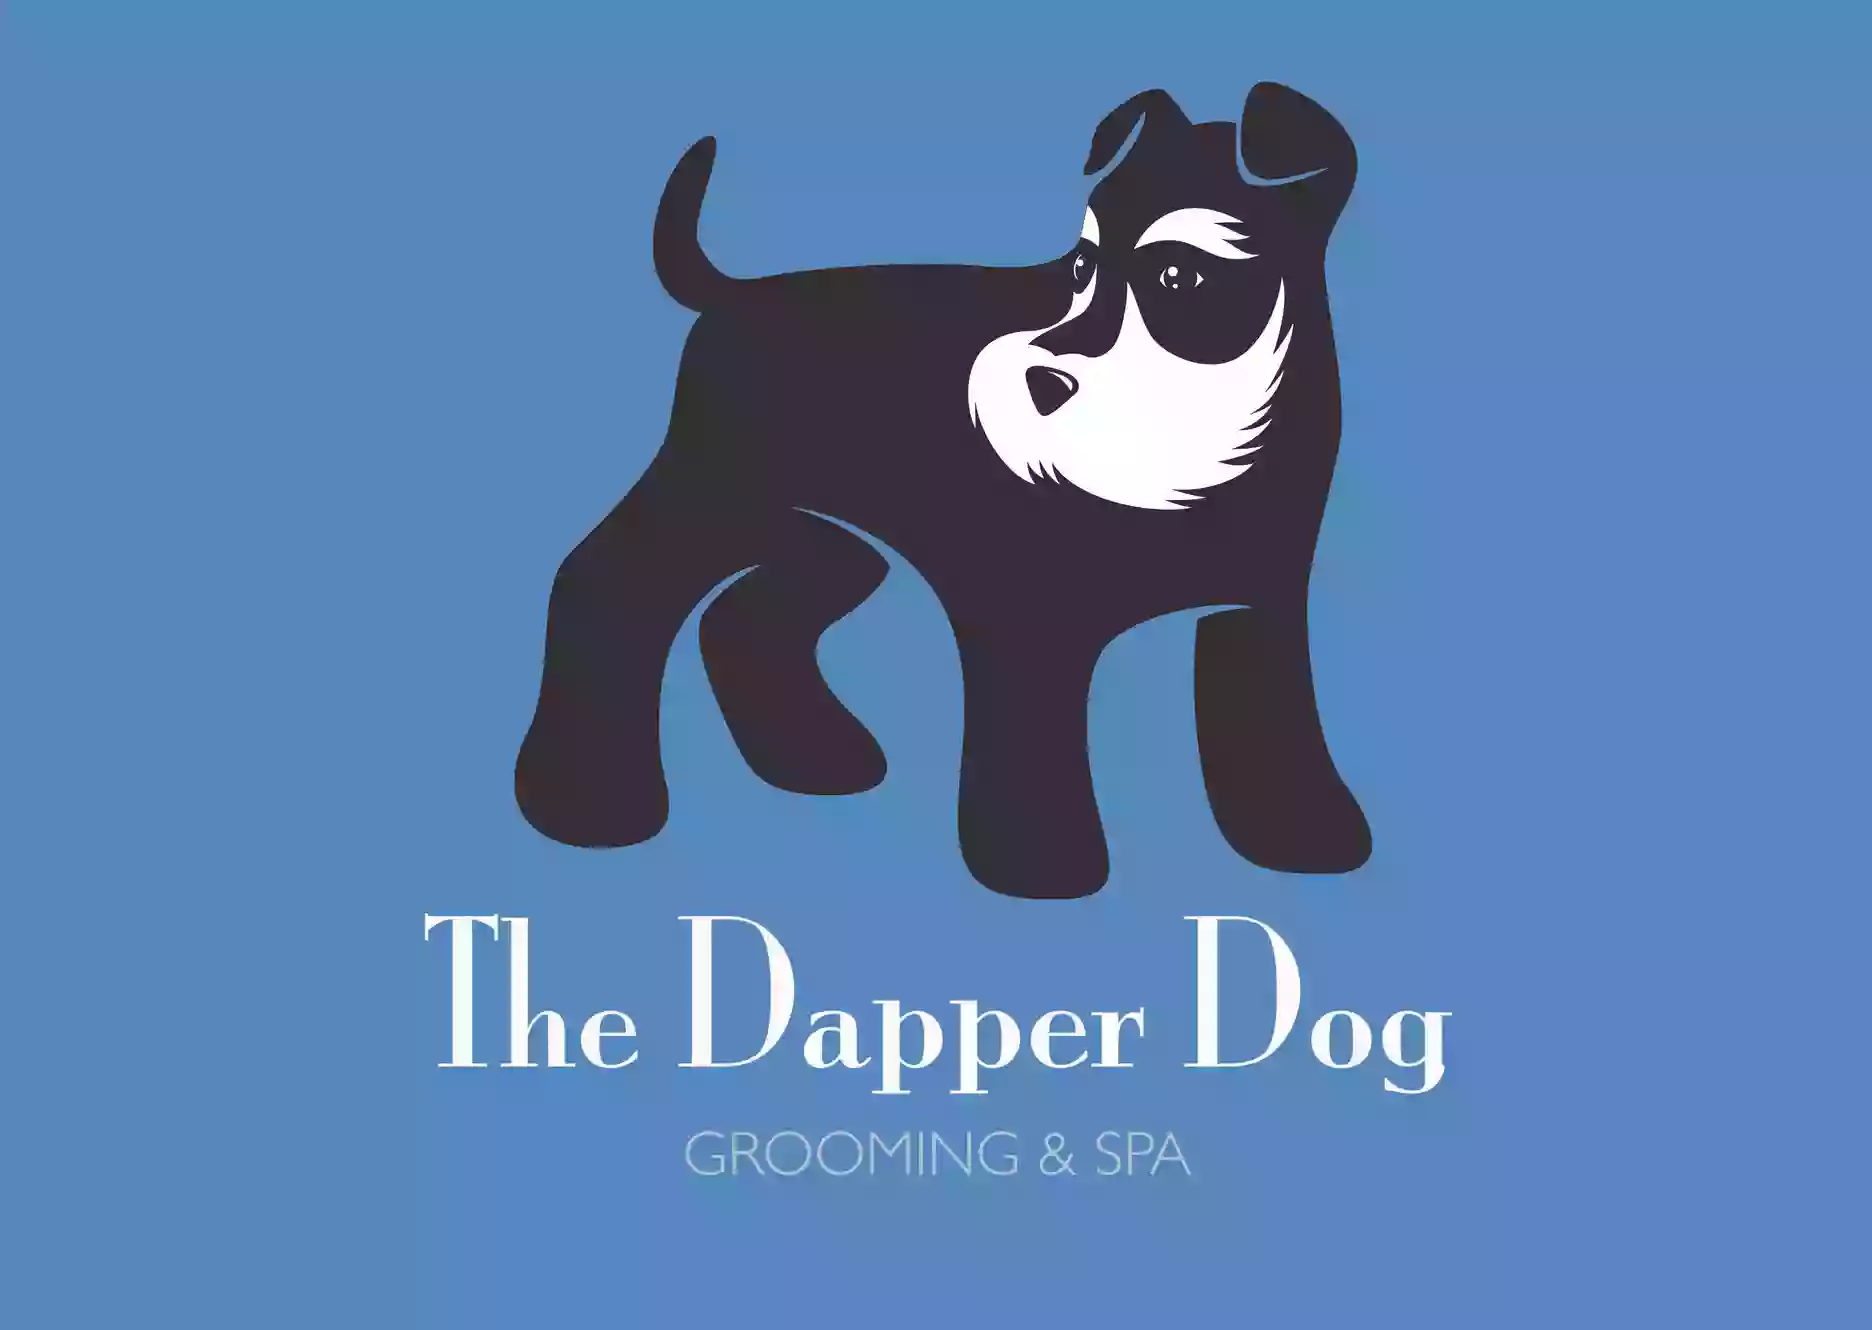 The Dapper Dog Grooming and Spa